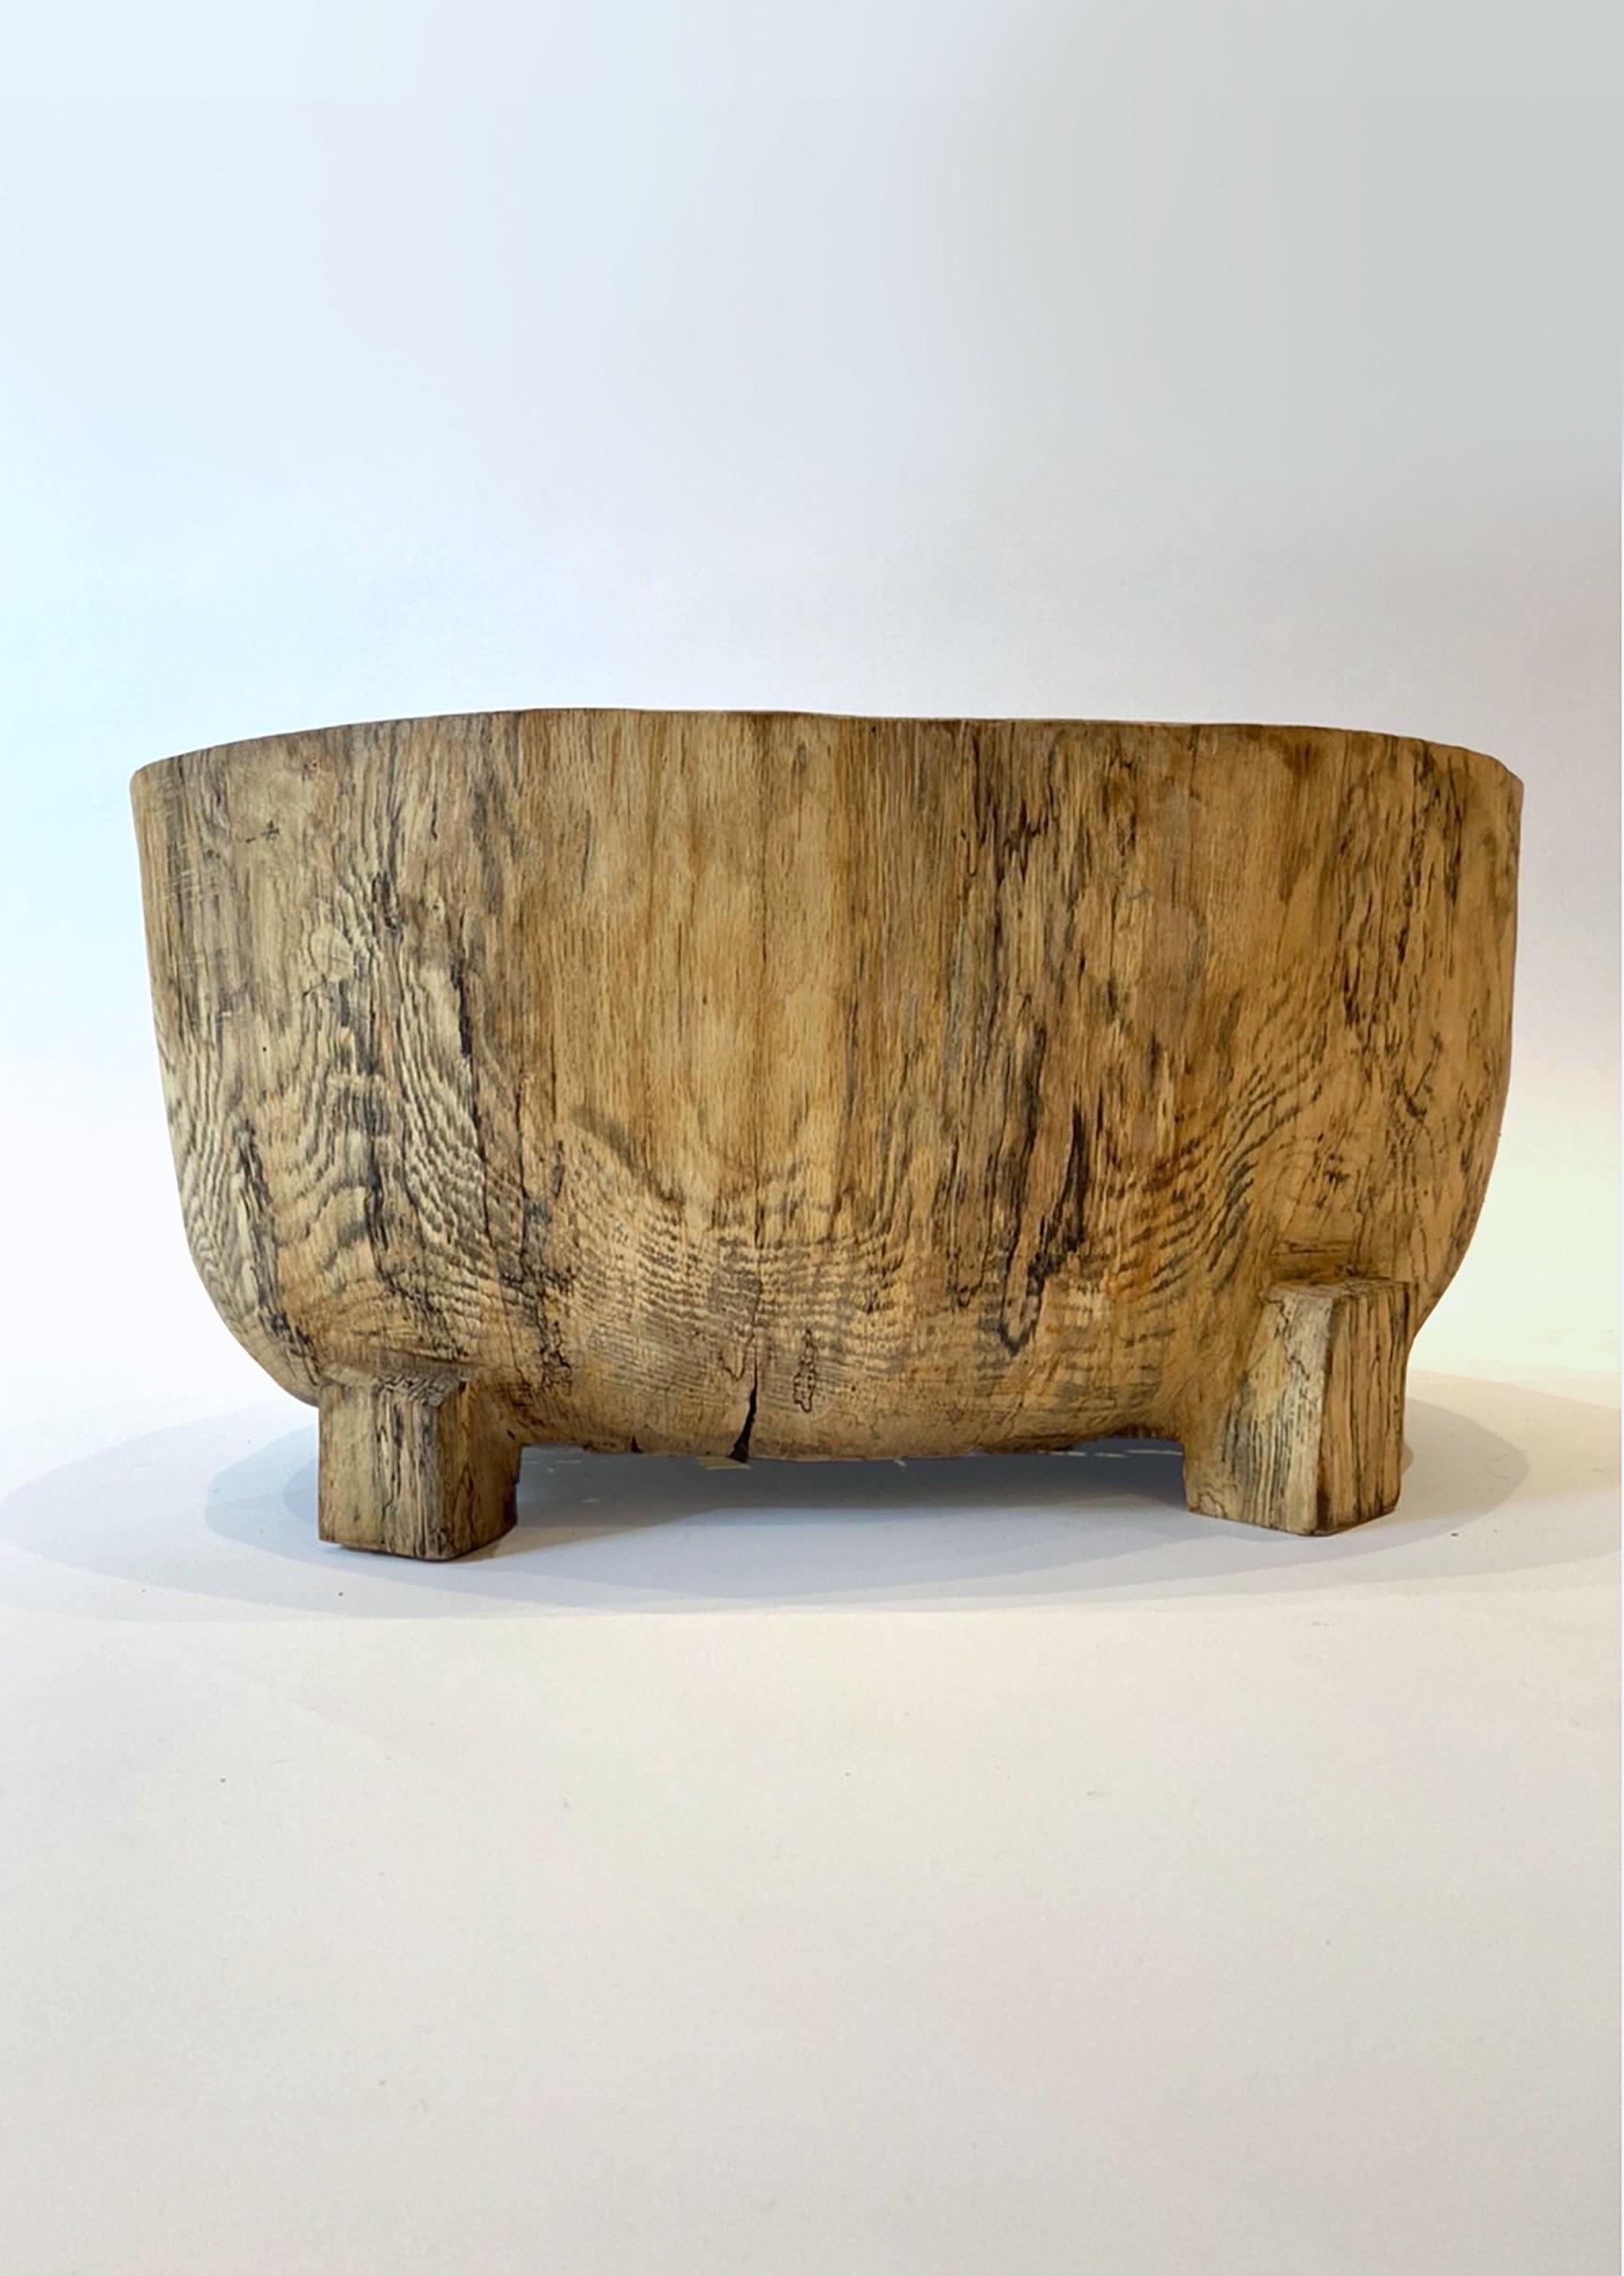 Name: Daifuku
Sculptural stool by Zogei carved furniture
Material: Quercus serrata
This work is carved from log with some kinds of chainsaws.
Most of wood used for Nishimura's works are unable to use anything, these woods are unsuitable material